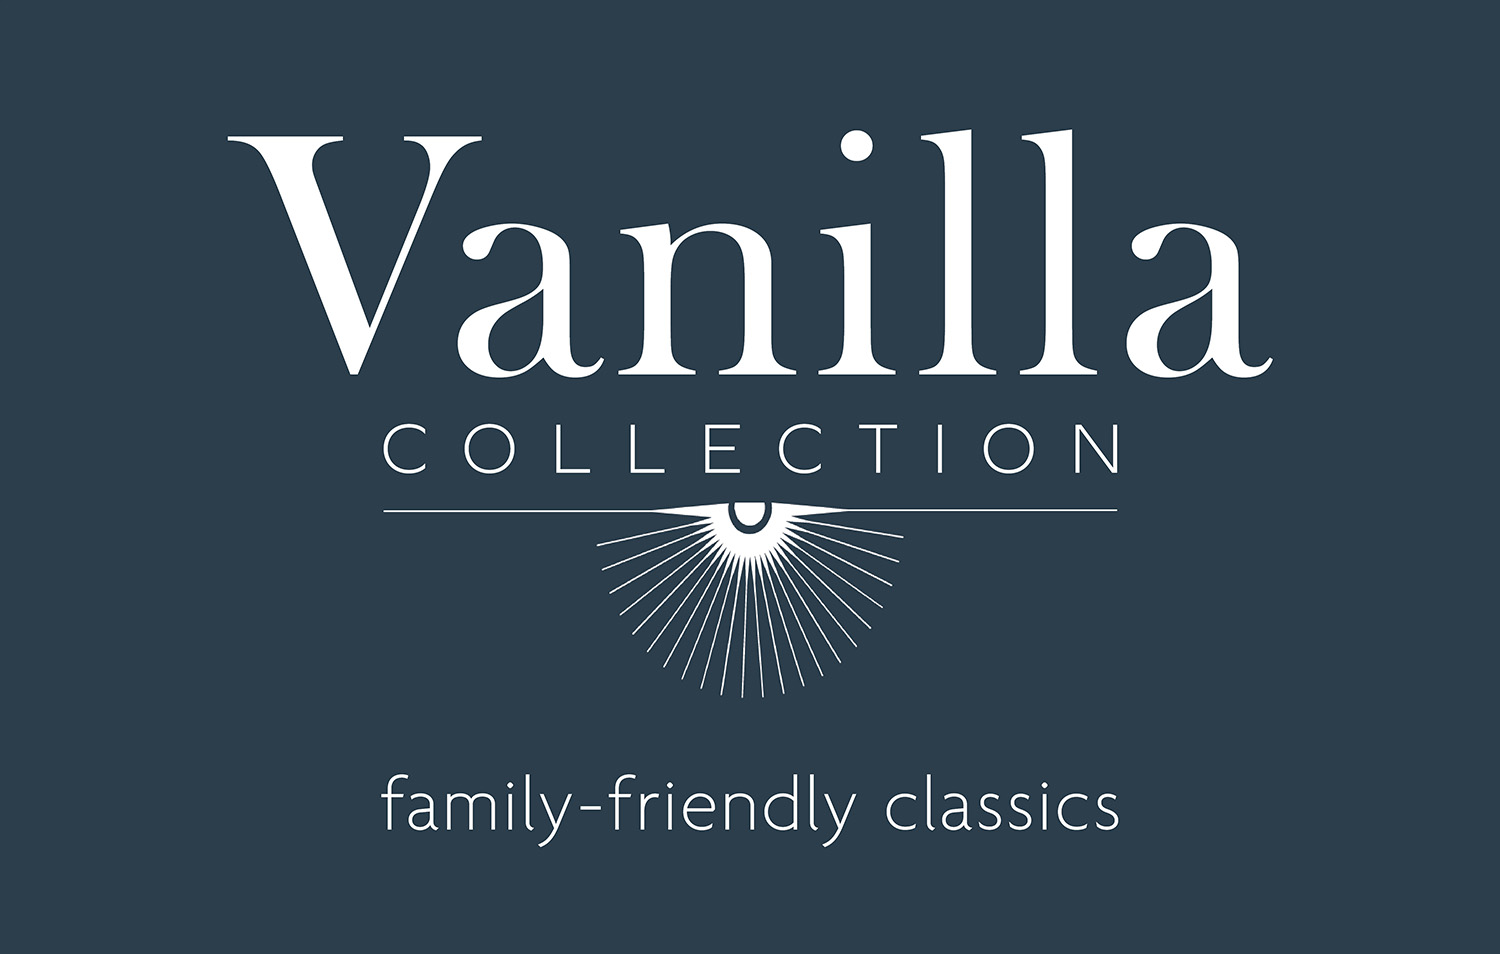 dark blue background with white text that says Vanilla Collection: family-friendly classics